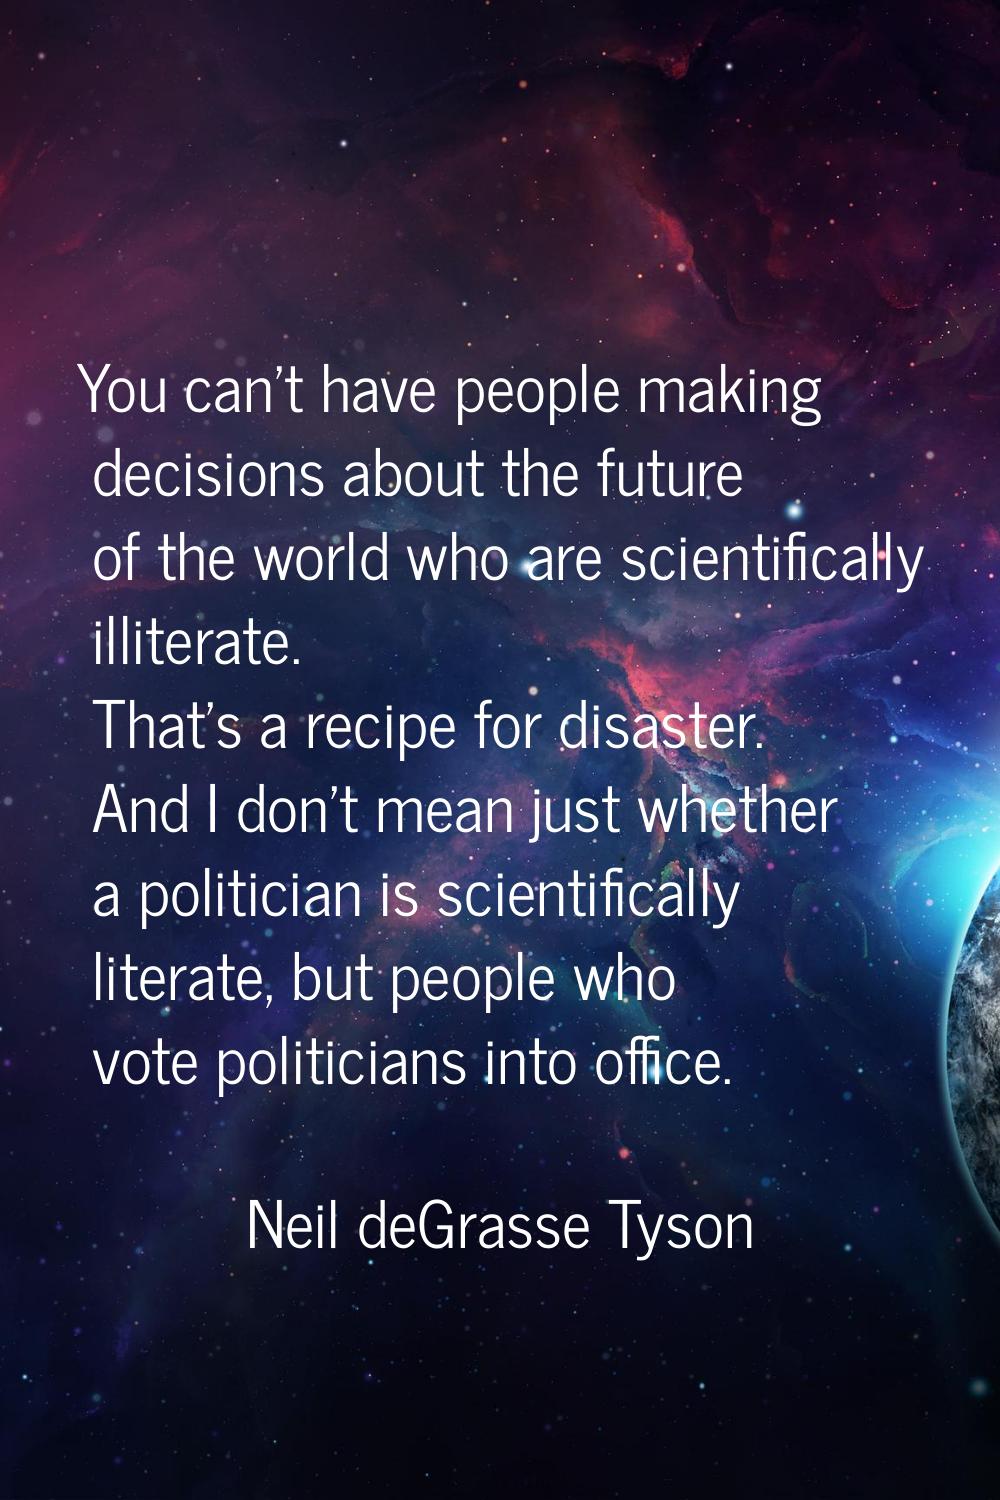 You can't have people making decisions about the future of the world who are scientifically illiter